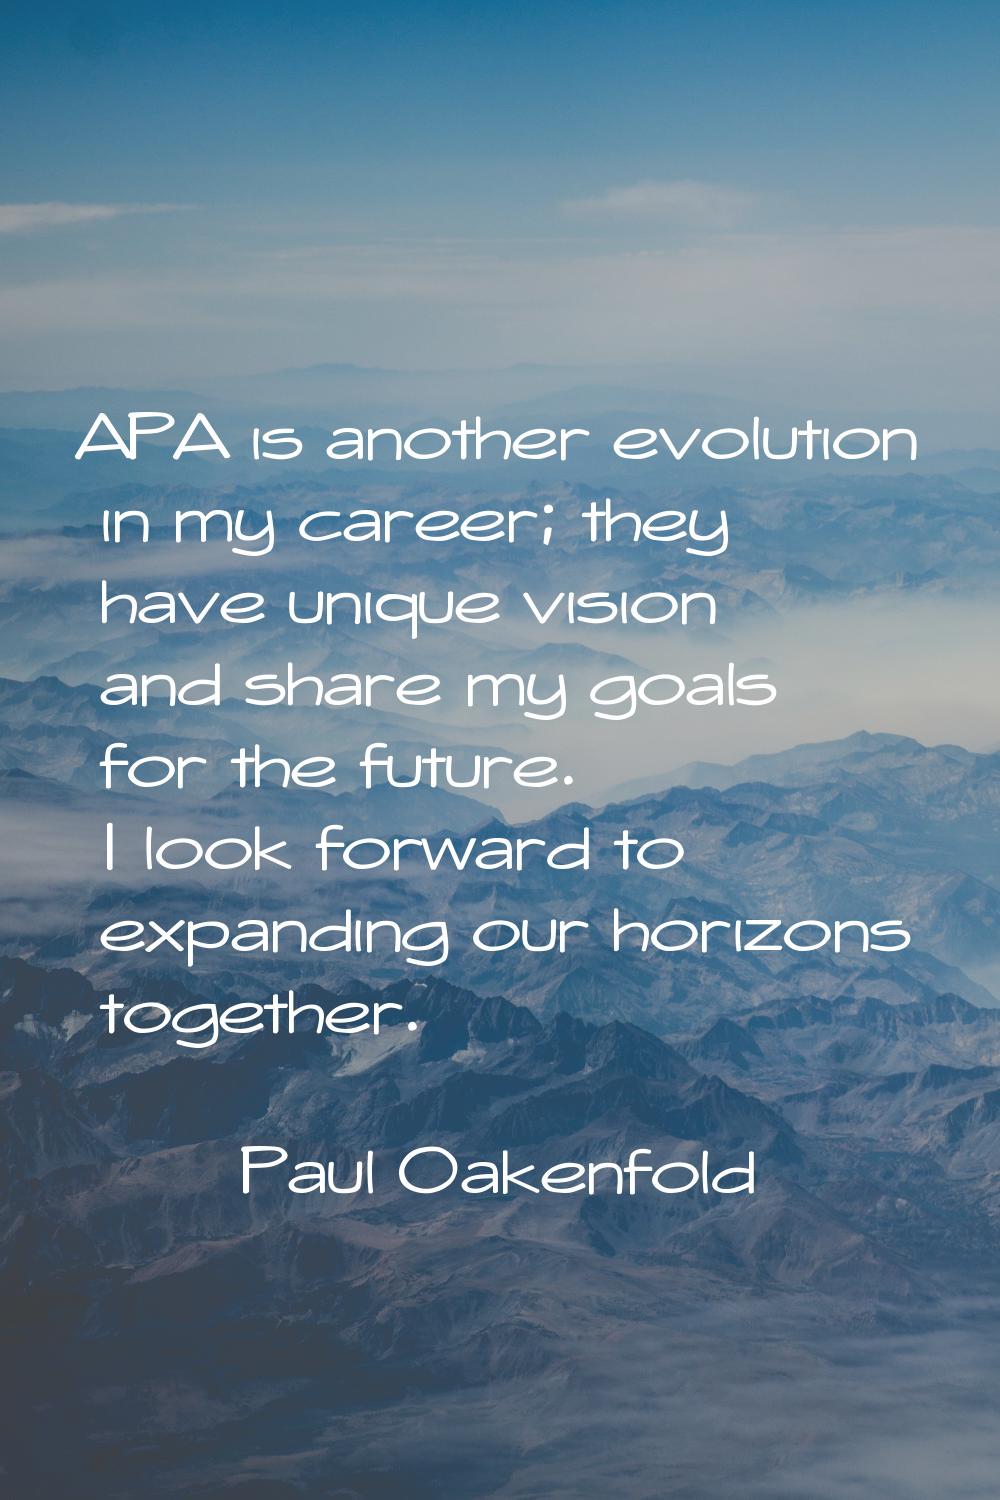 APA is another evolution in my career; they have unique vision and share my goals for the future. I